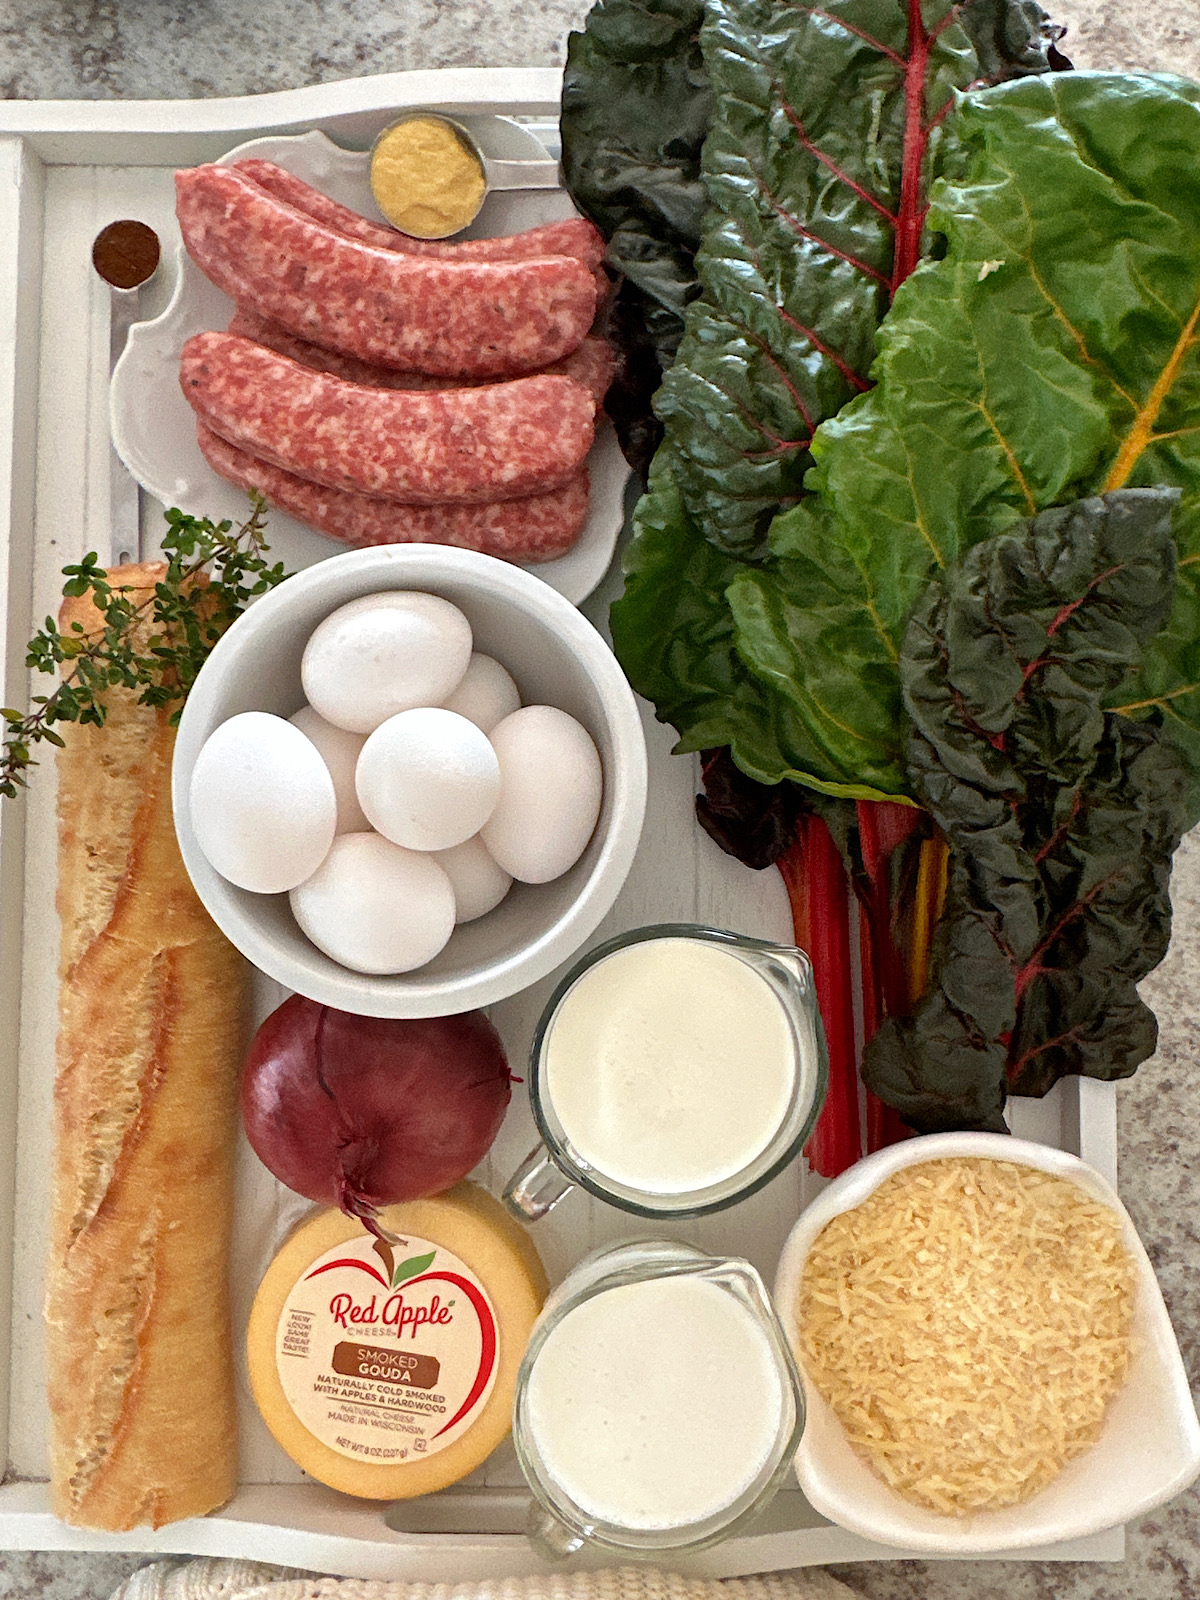 Ingredients for breakfast strata of swiiss chard, sausage and cheese.